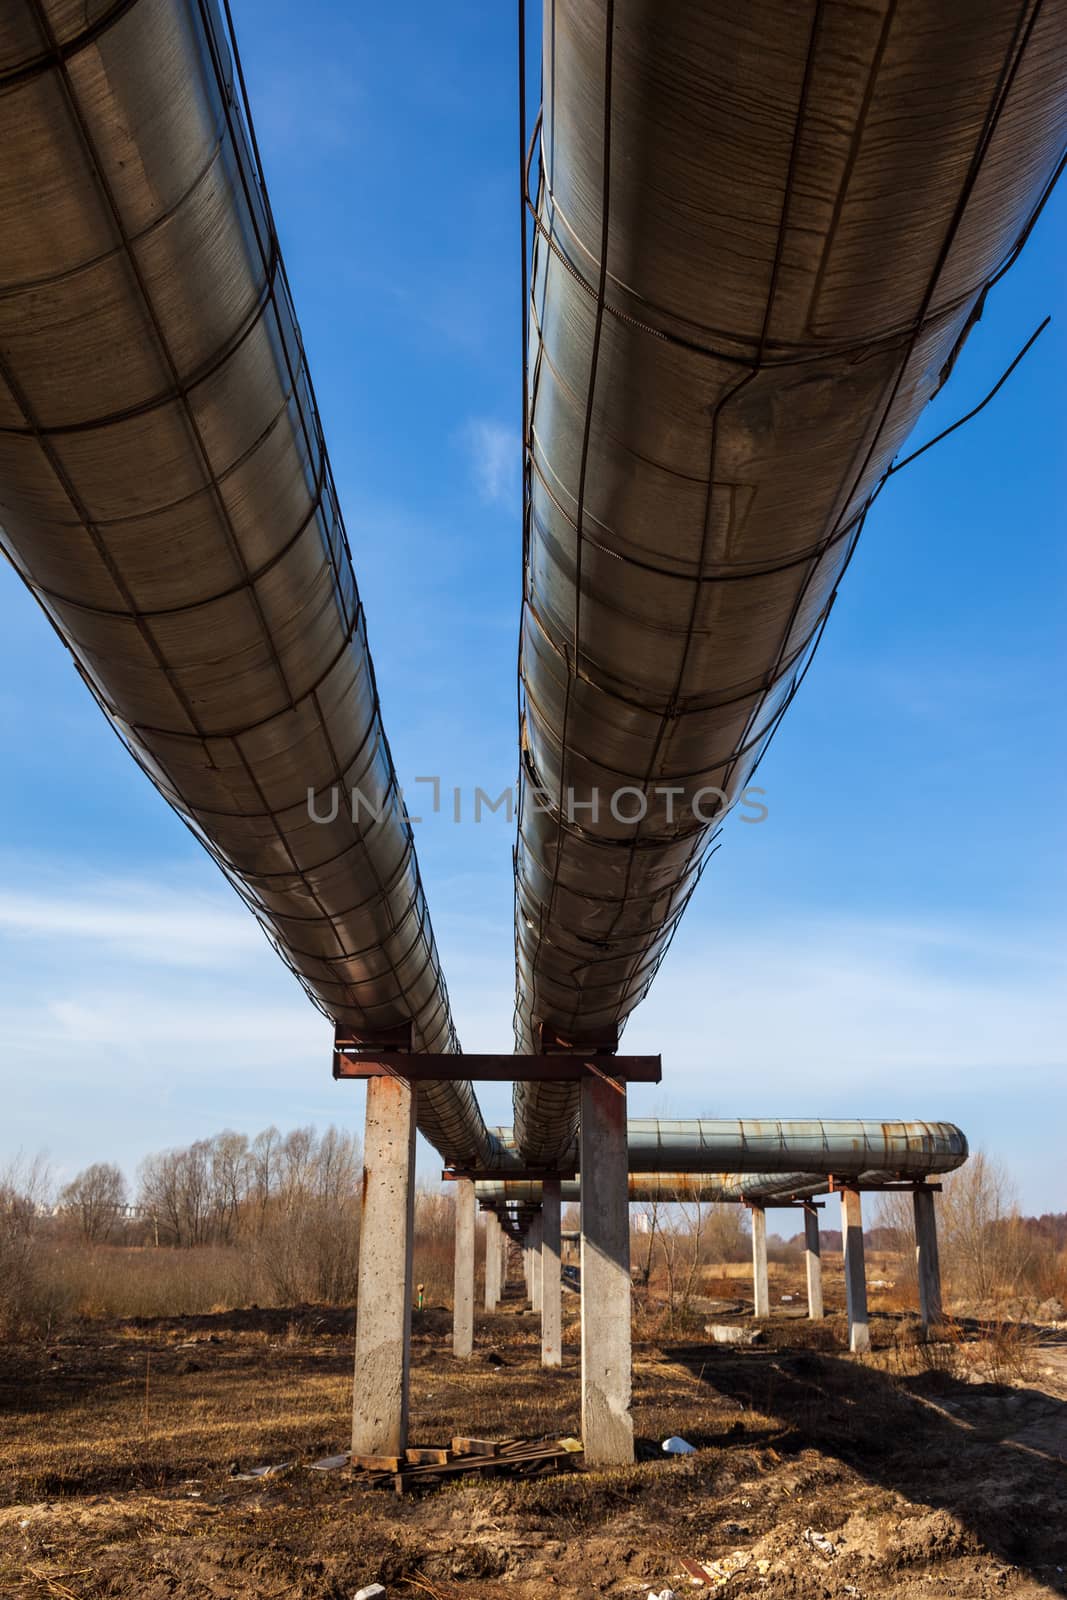 Elevated section of heating pipelines.